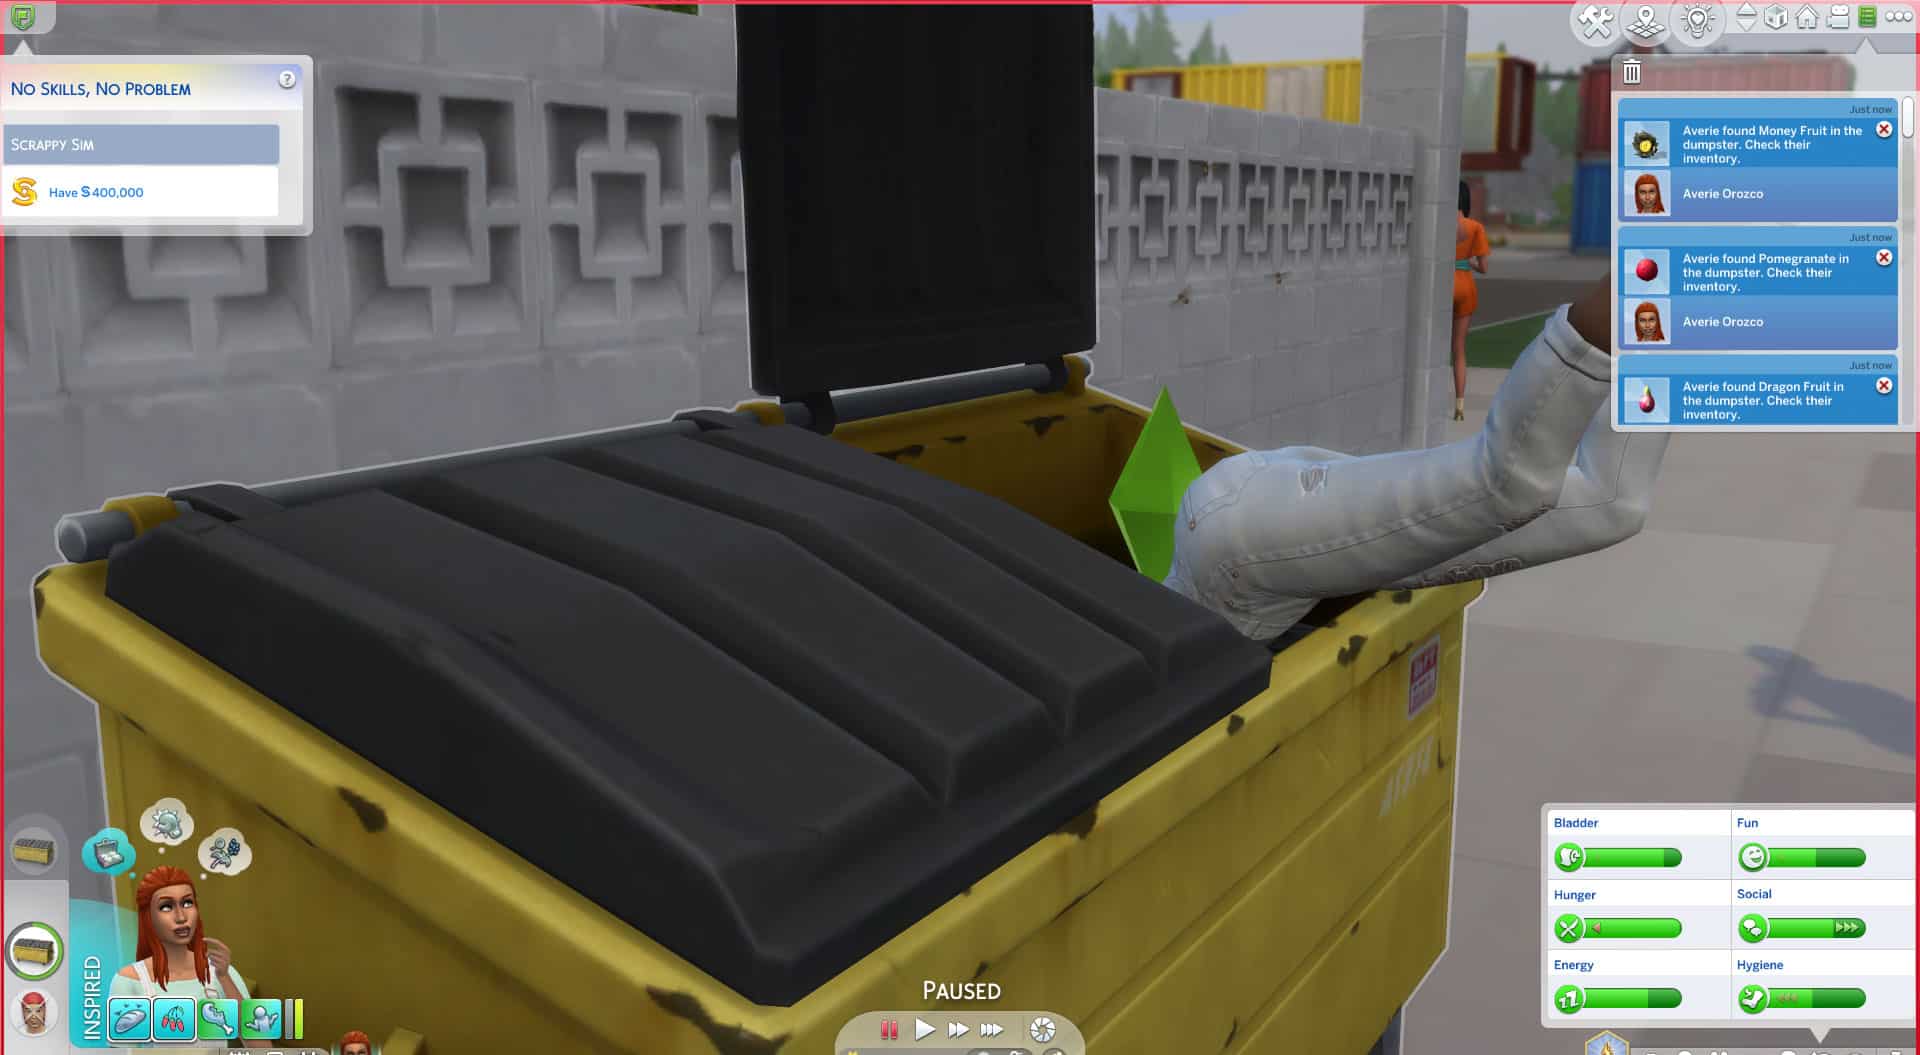 the sims 4 dumpster diving for deals for the no skills no problem scenario